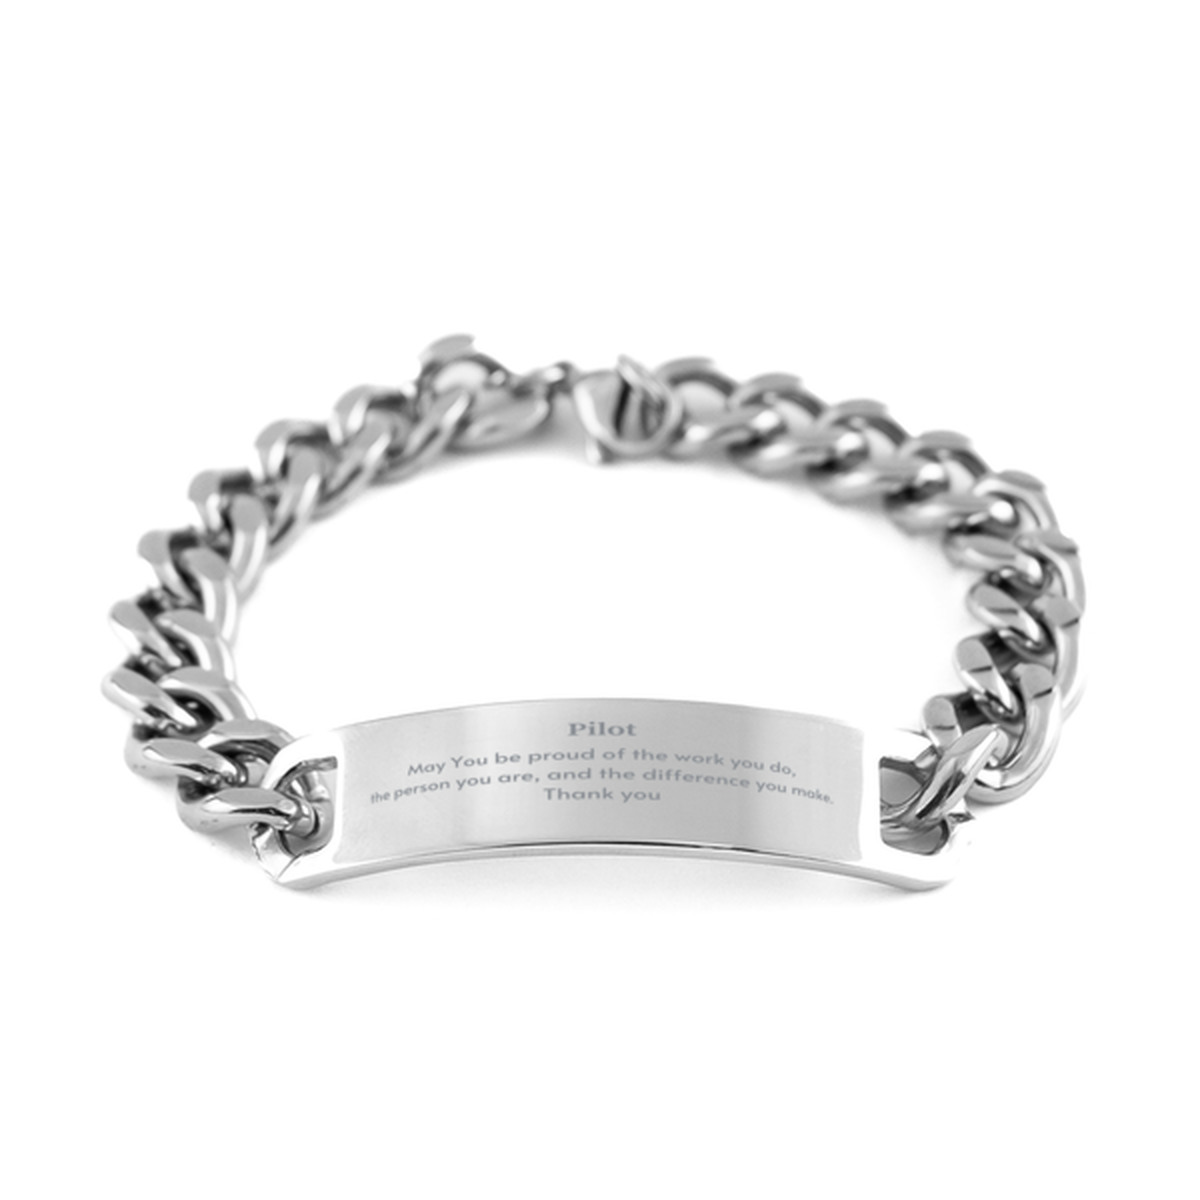 Heartwarming Cuban Chain Stainless Steel Bracelet Retirement Coworkers Gifts for Pilot, Pilot May You be proud of the work you do, the person you are Gifts for Boss Men Women Friends